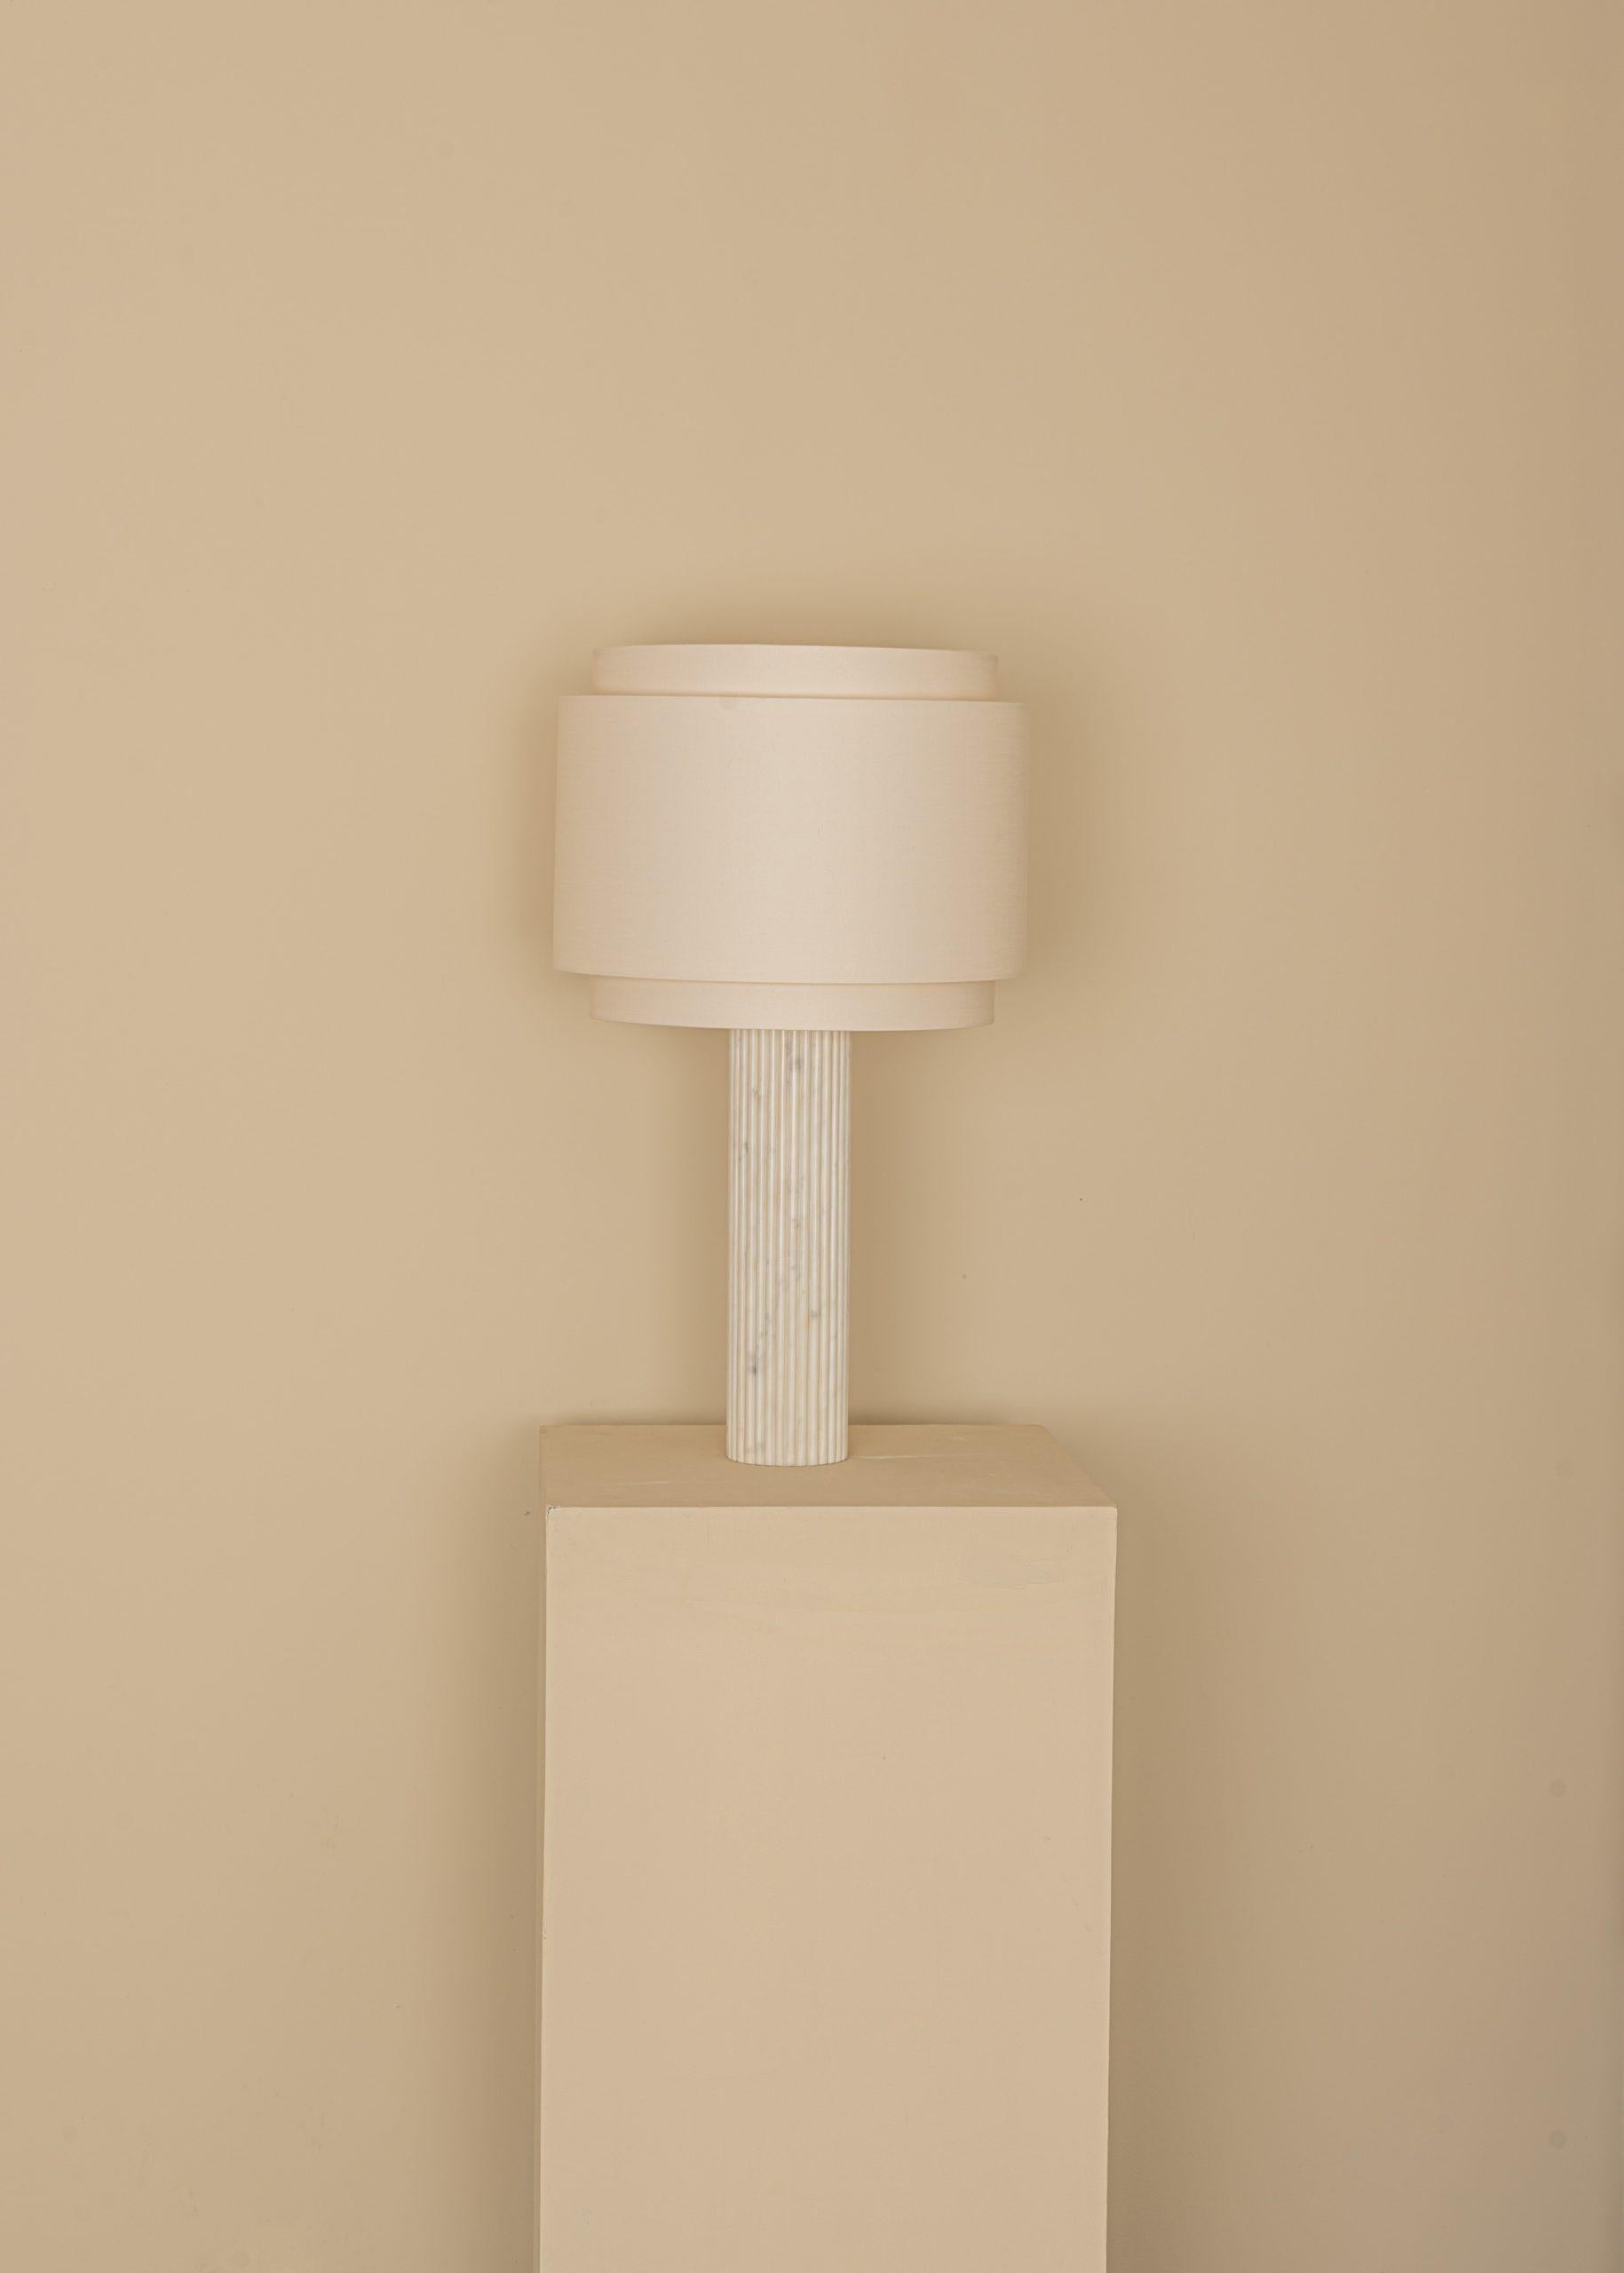 White Marble Fluta DuobleTable Lamp by Simone & Marcel
Dimensions: D 35 x W 35 x H 60 cm.
Materials: Cotton and white marble.

Also available in different marble and wood options and finishes. Custom options available on request. Please contact us.